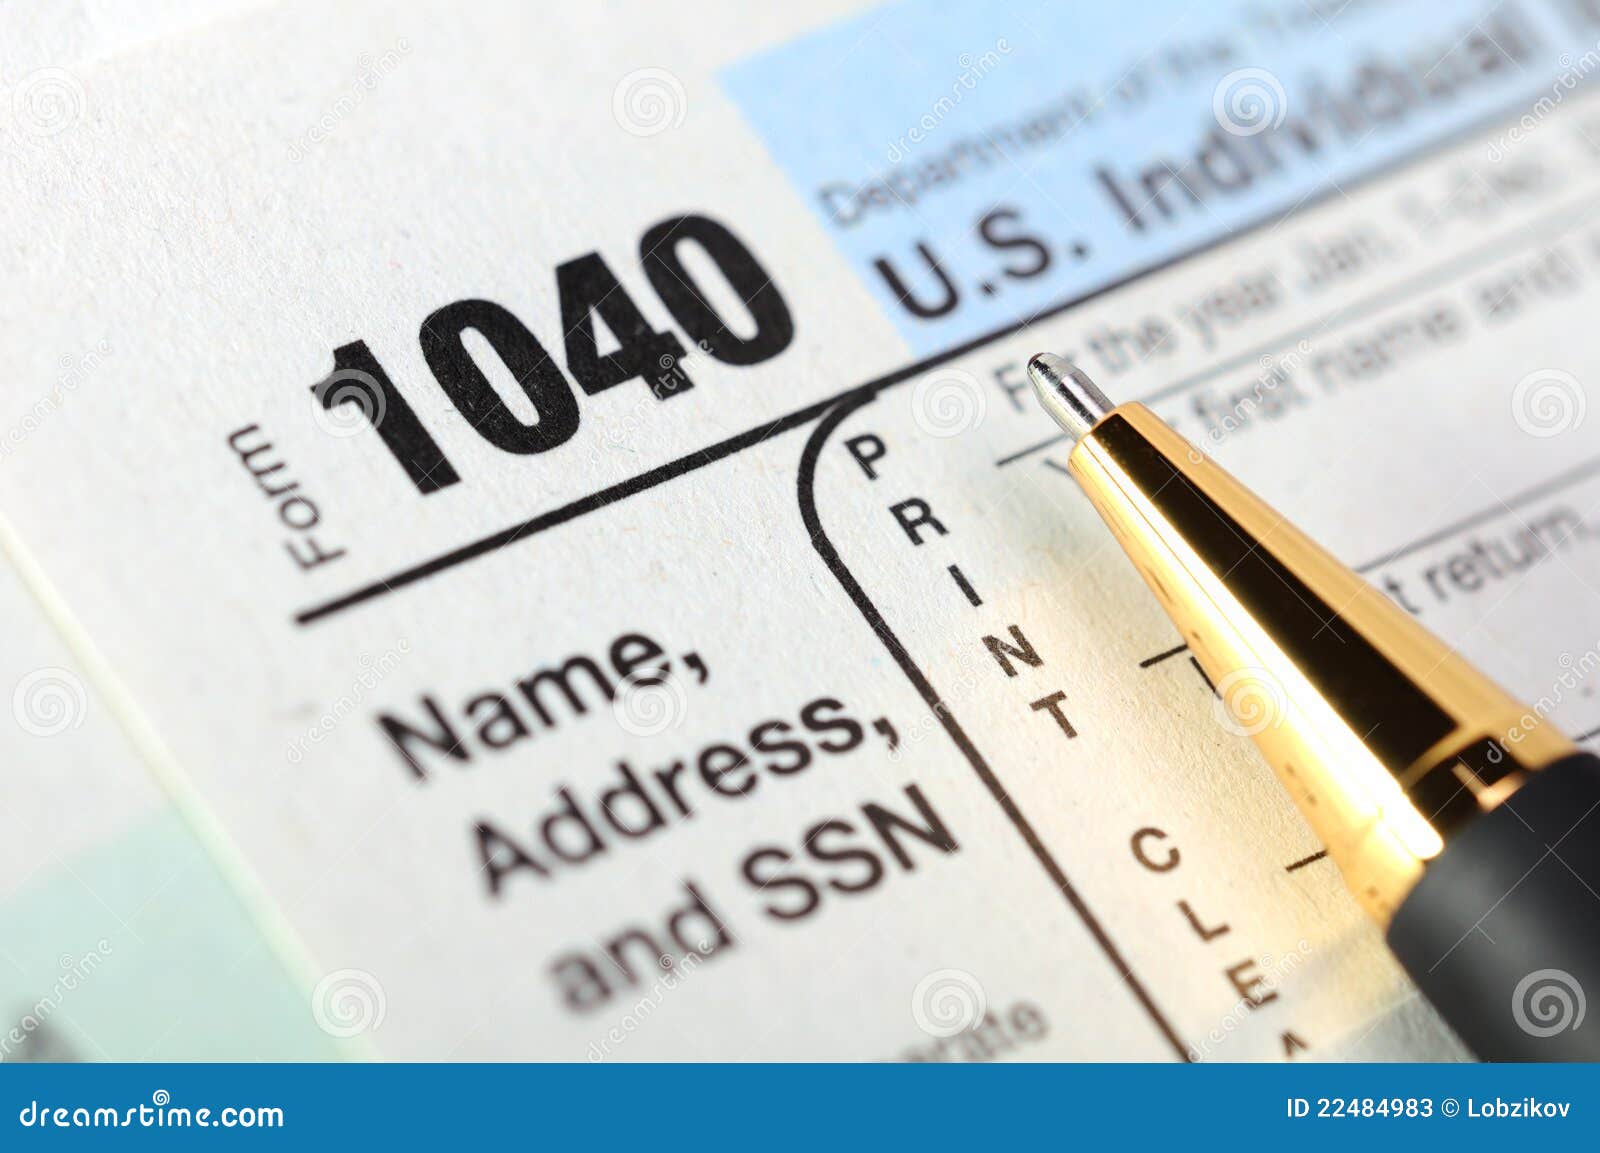 u-s-income-tax-return-form-1040-editorial-stock-photo-image-of